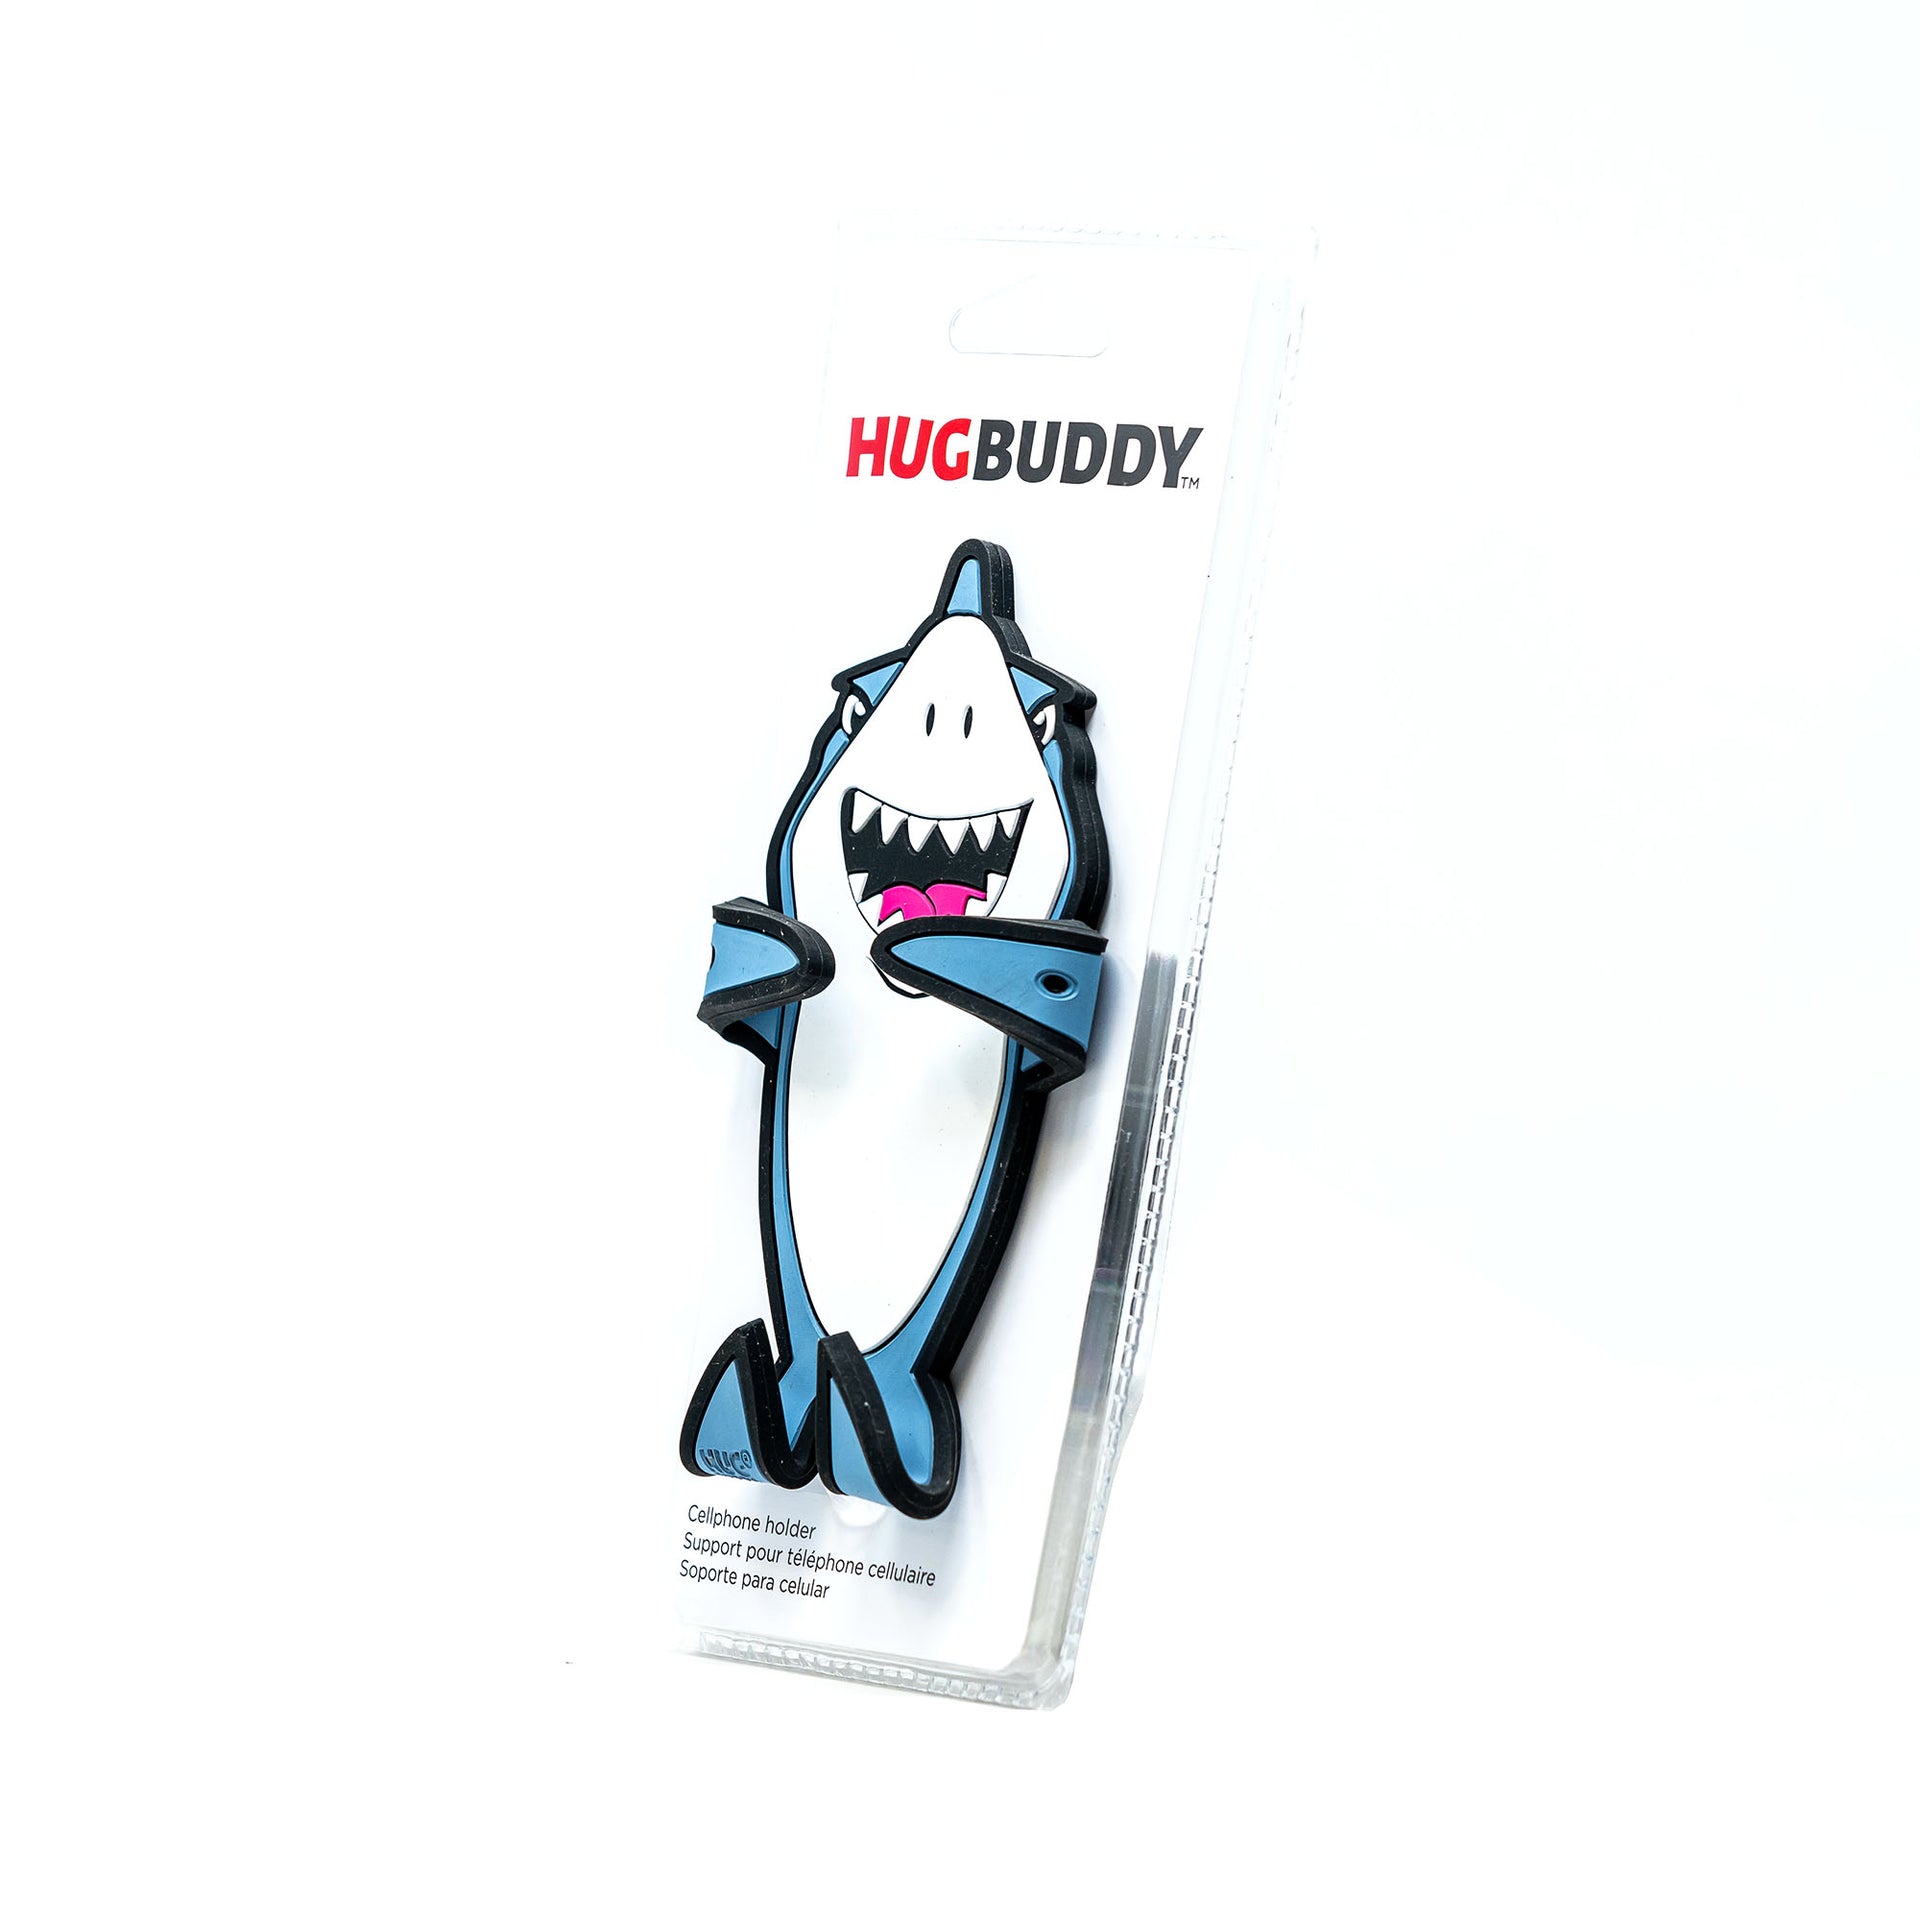 Image of Jaws the Shark Hug Buddy packaging 45 degree side view